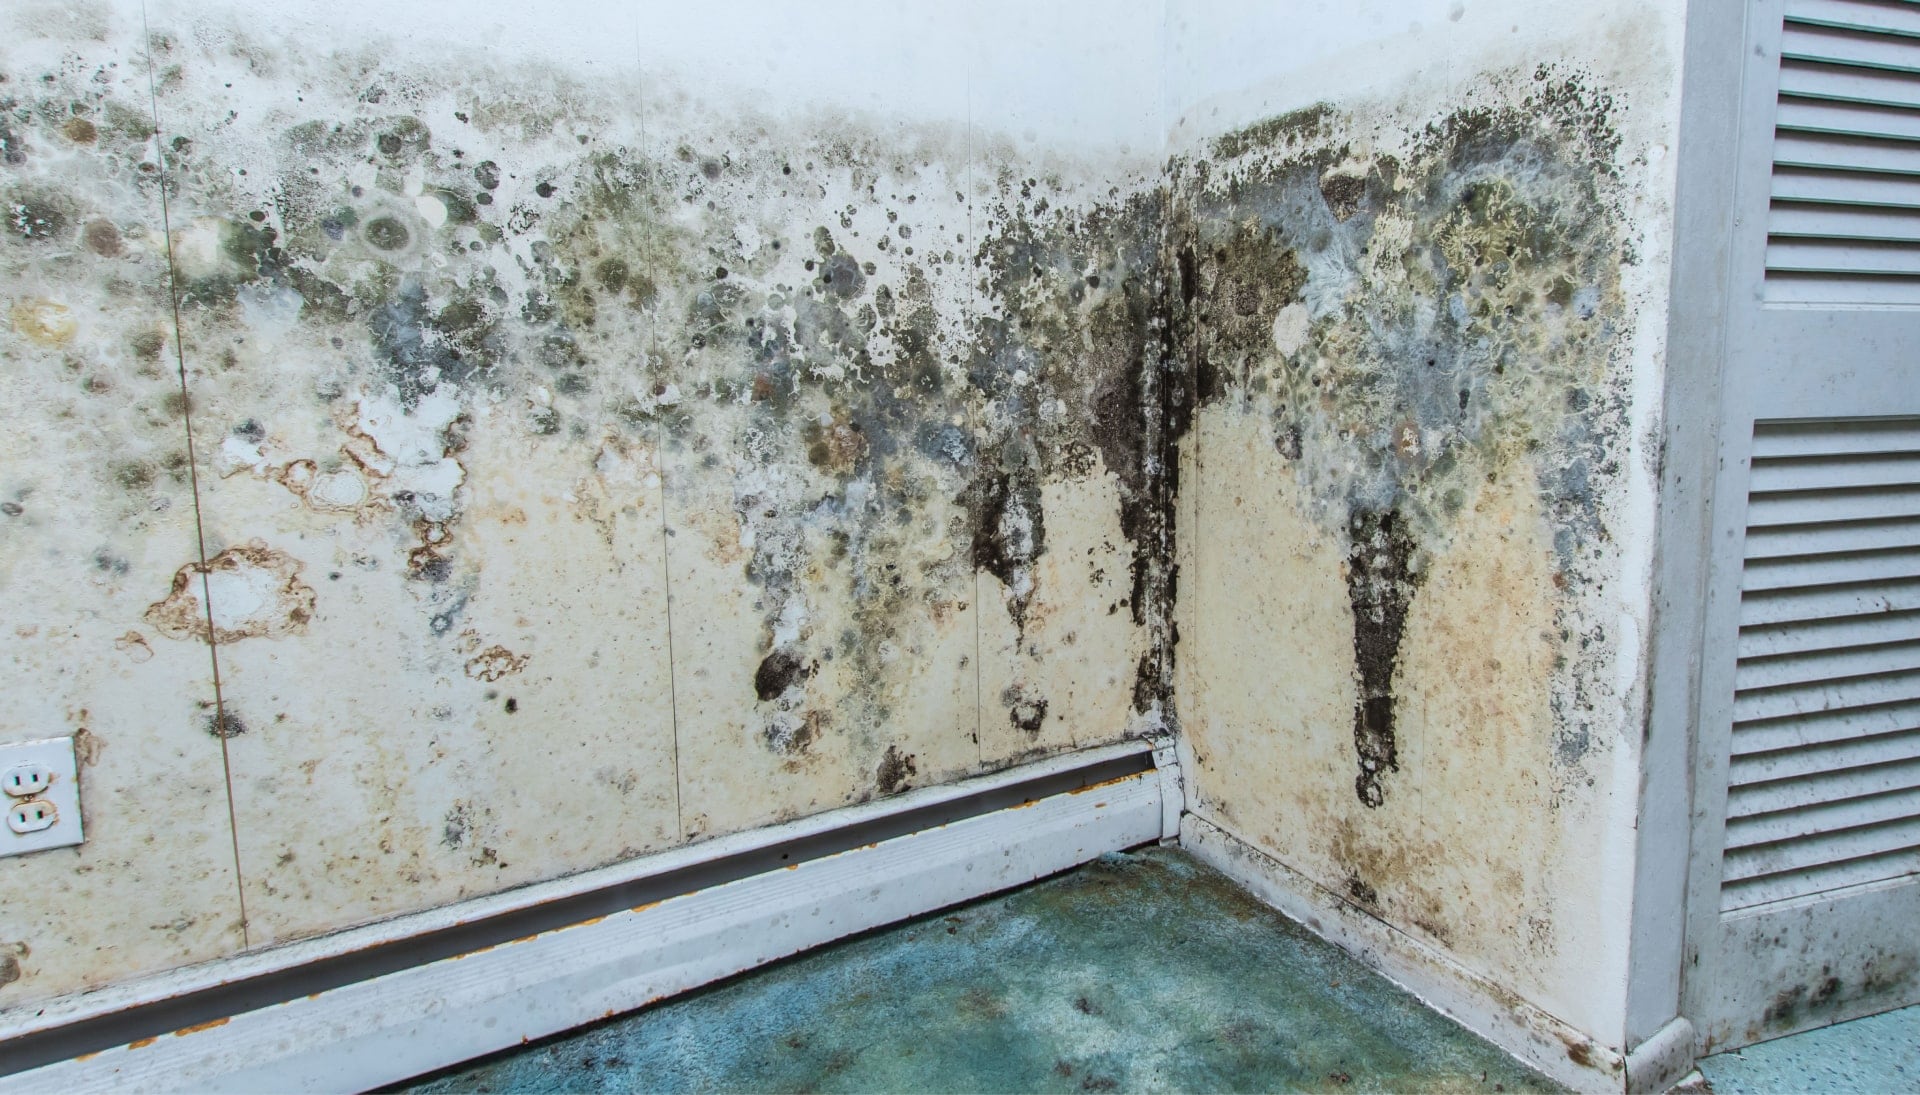 A mold remediation team using specialized techniques to remove mold damage and control odors in a Topsham property, with a focus on safety and efficiency